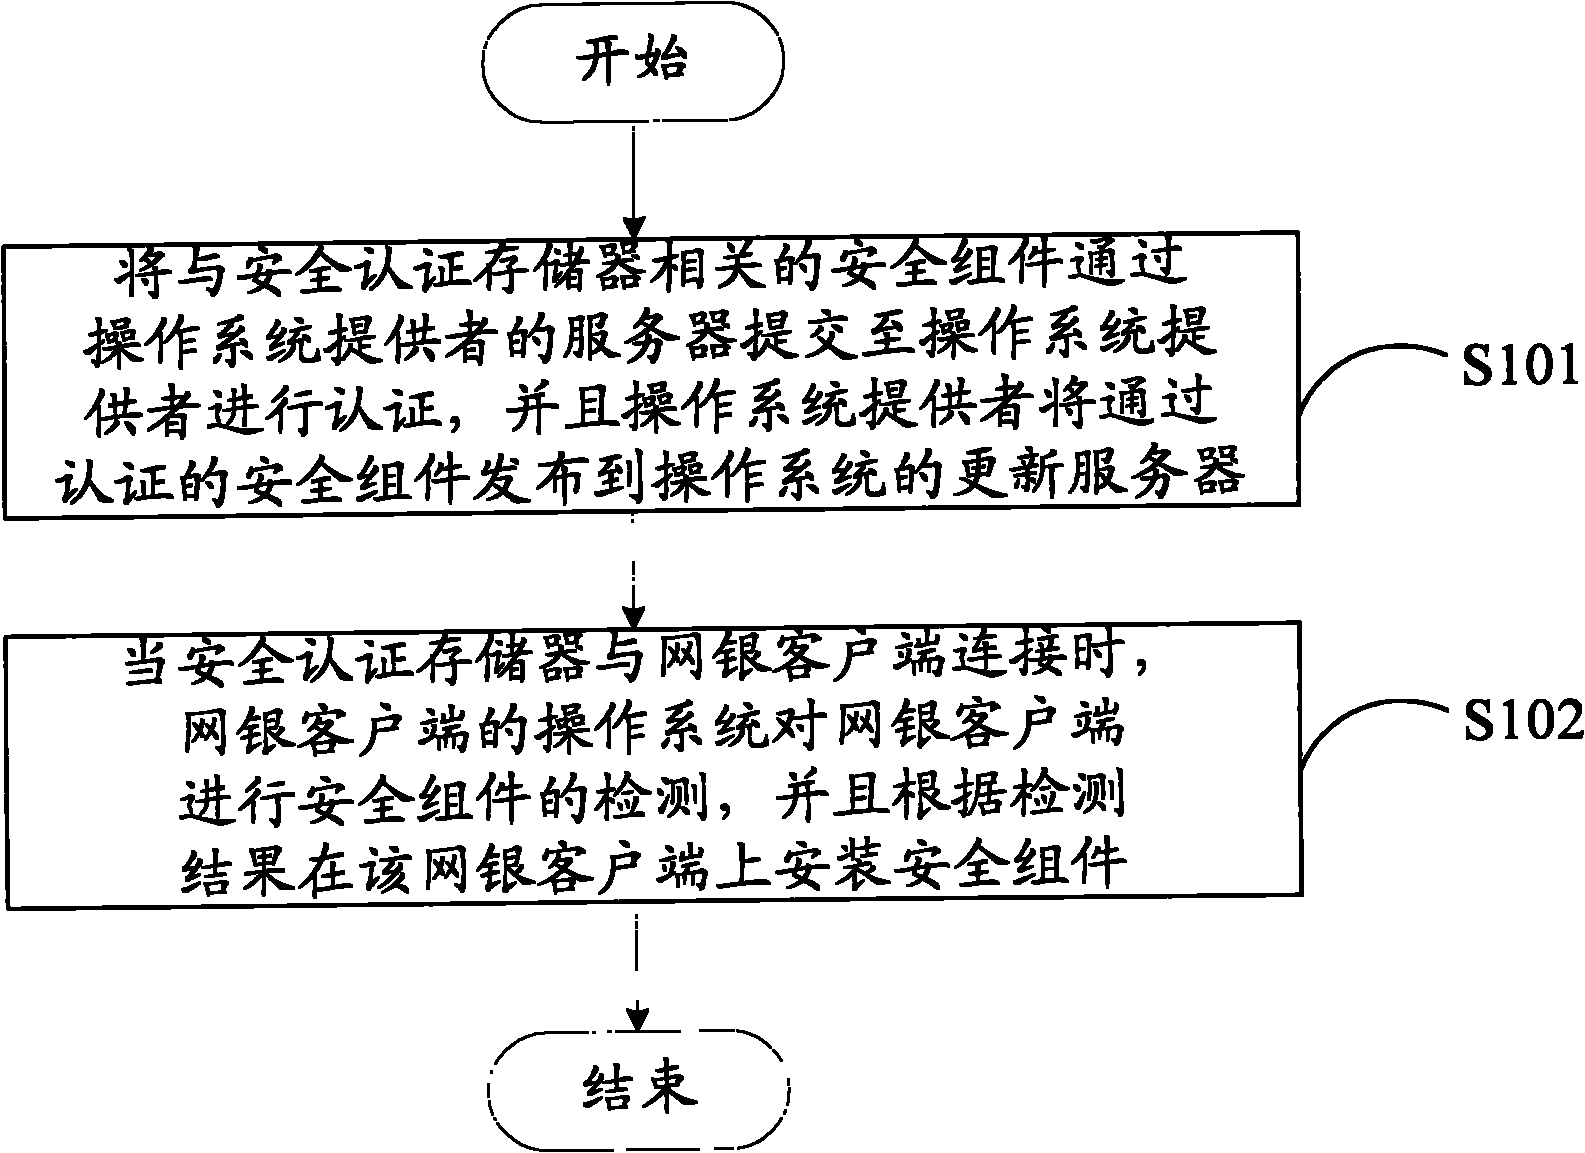 Methods for automatically loading internet bank security assembly and authenticating internet bank security